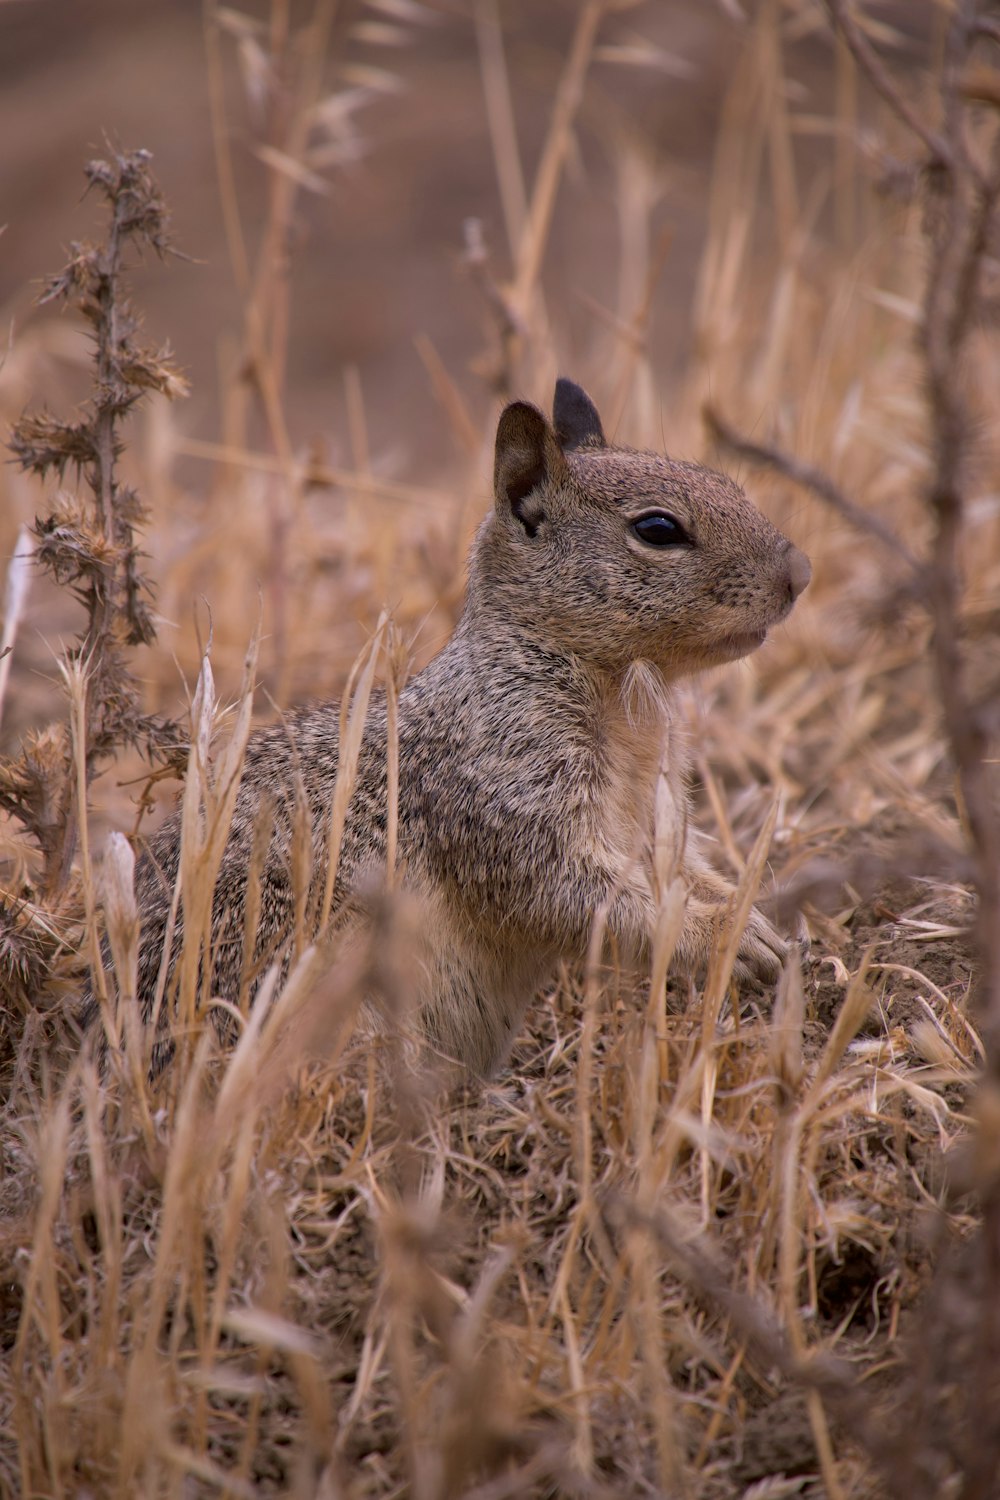 a small squirrel sitting in the middle of a field